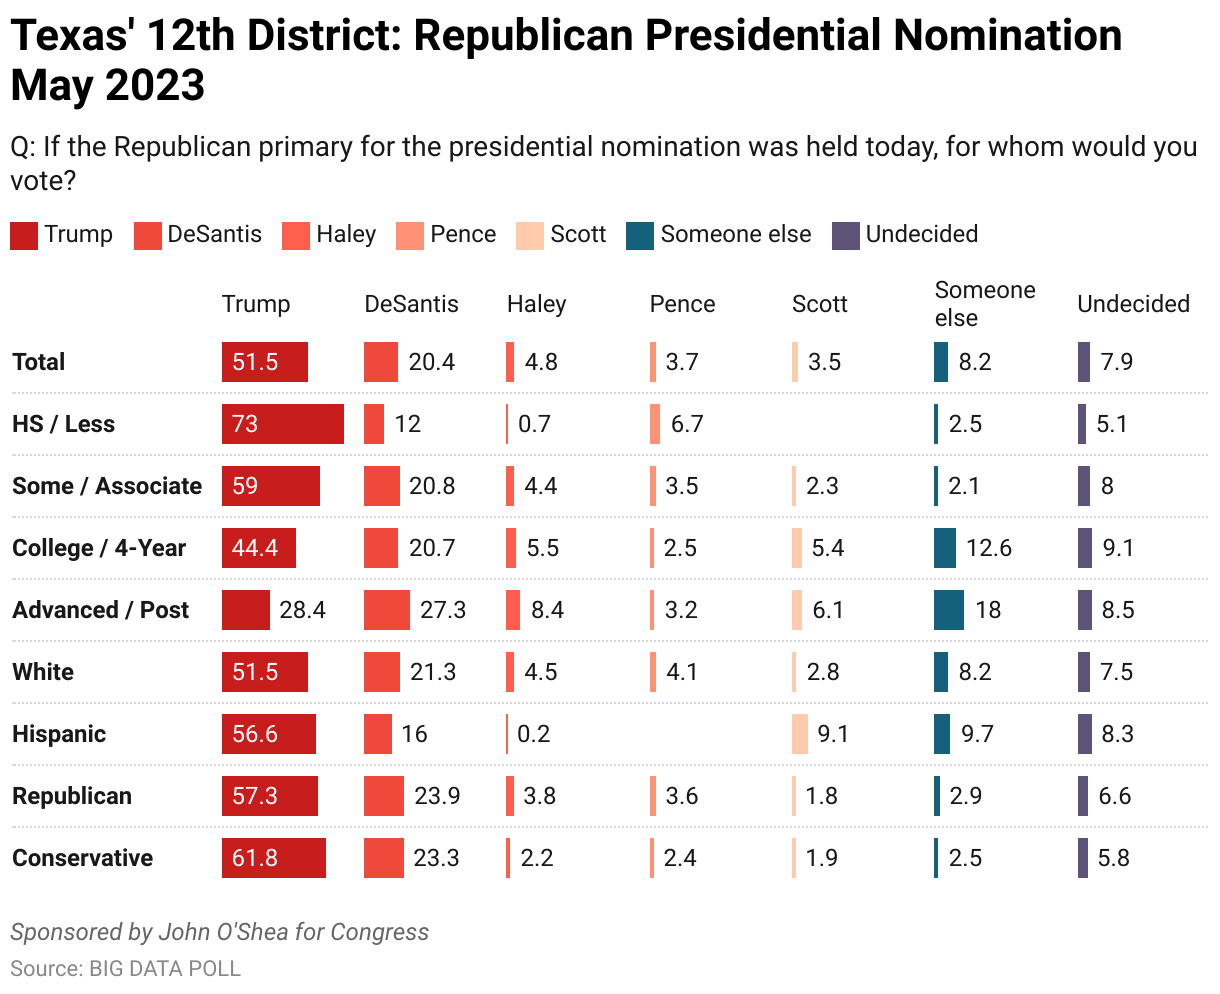 Texas' 12th District: Republican Presidential Nomination May 2023